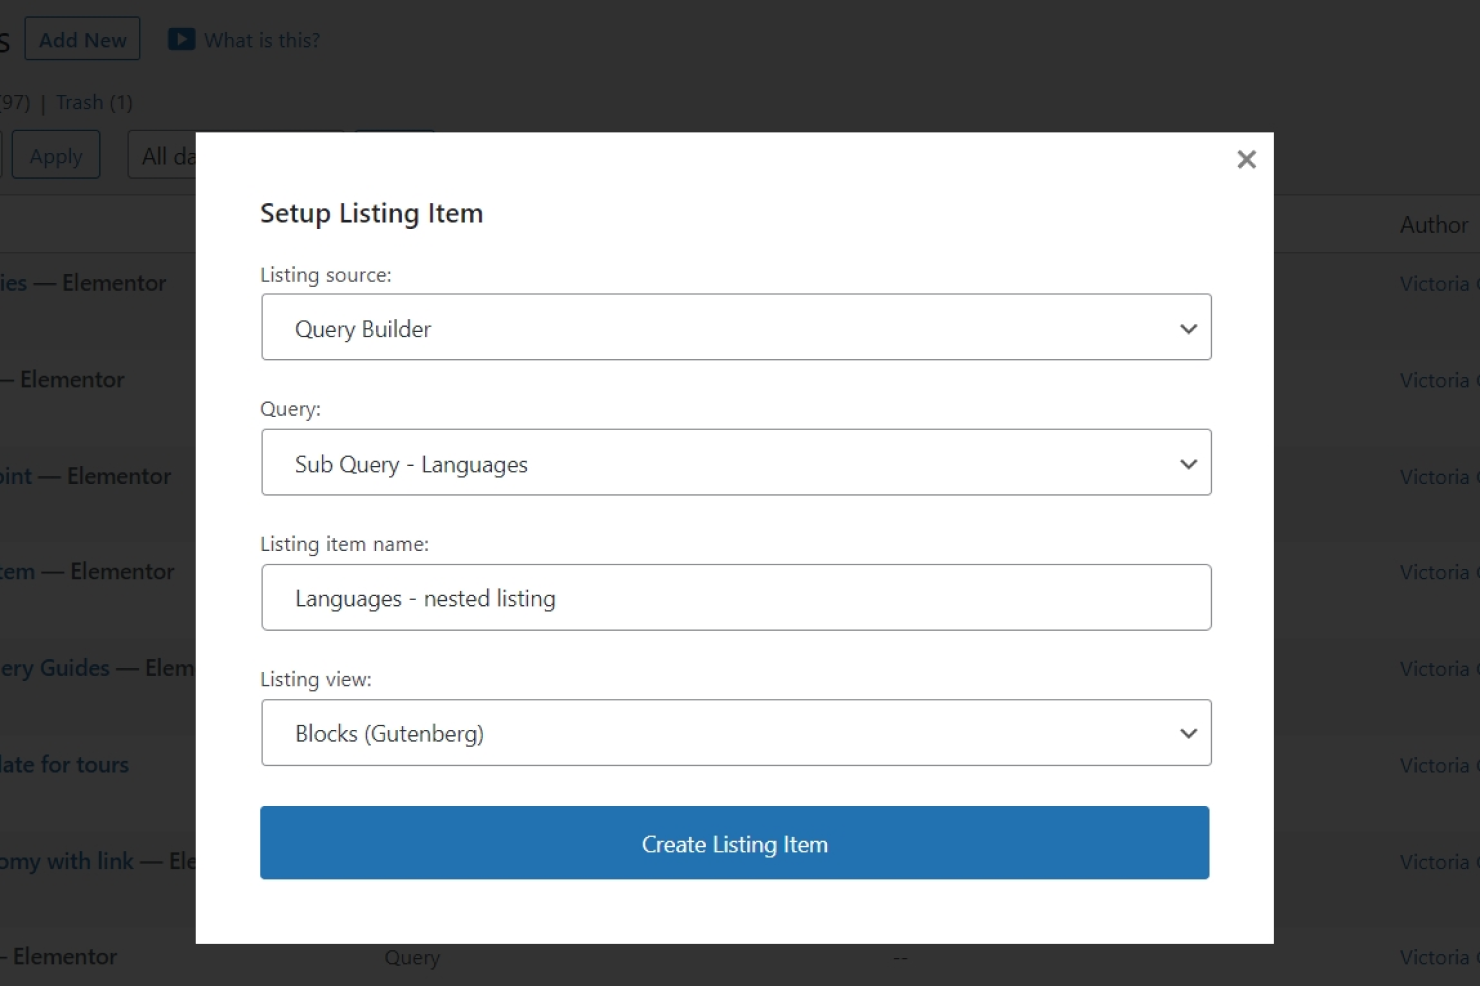 creating listing for sub query in gutenberg